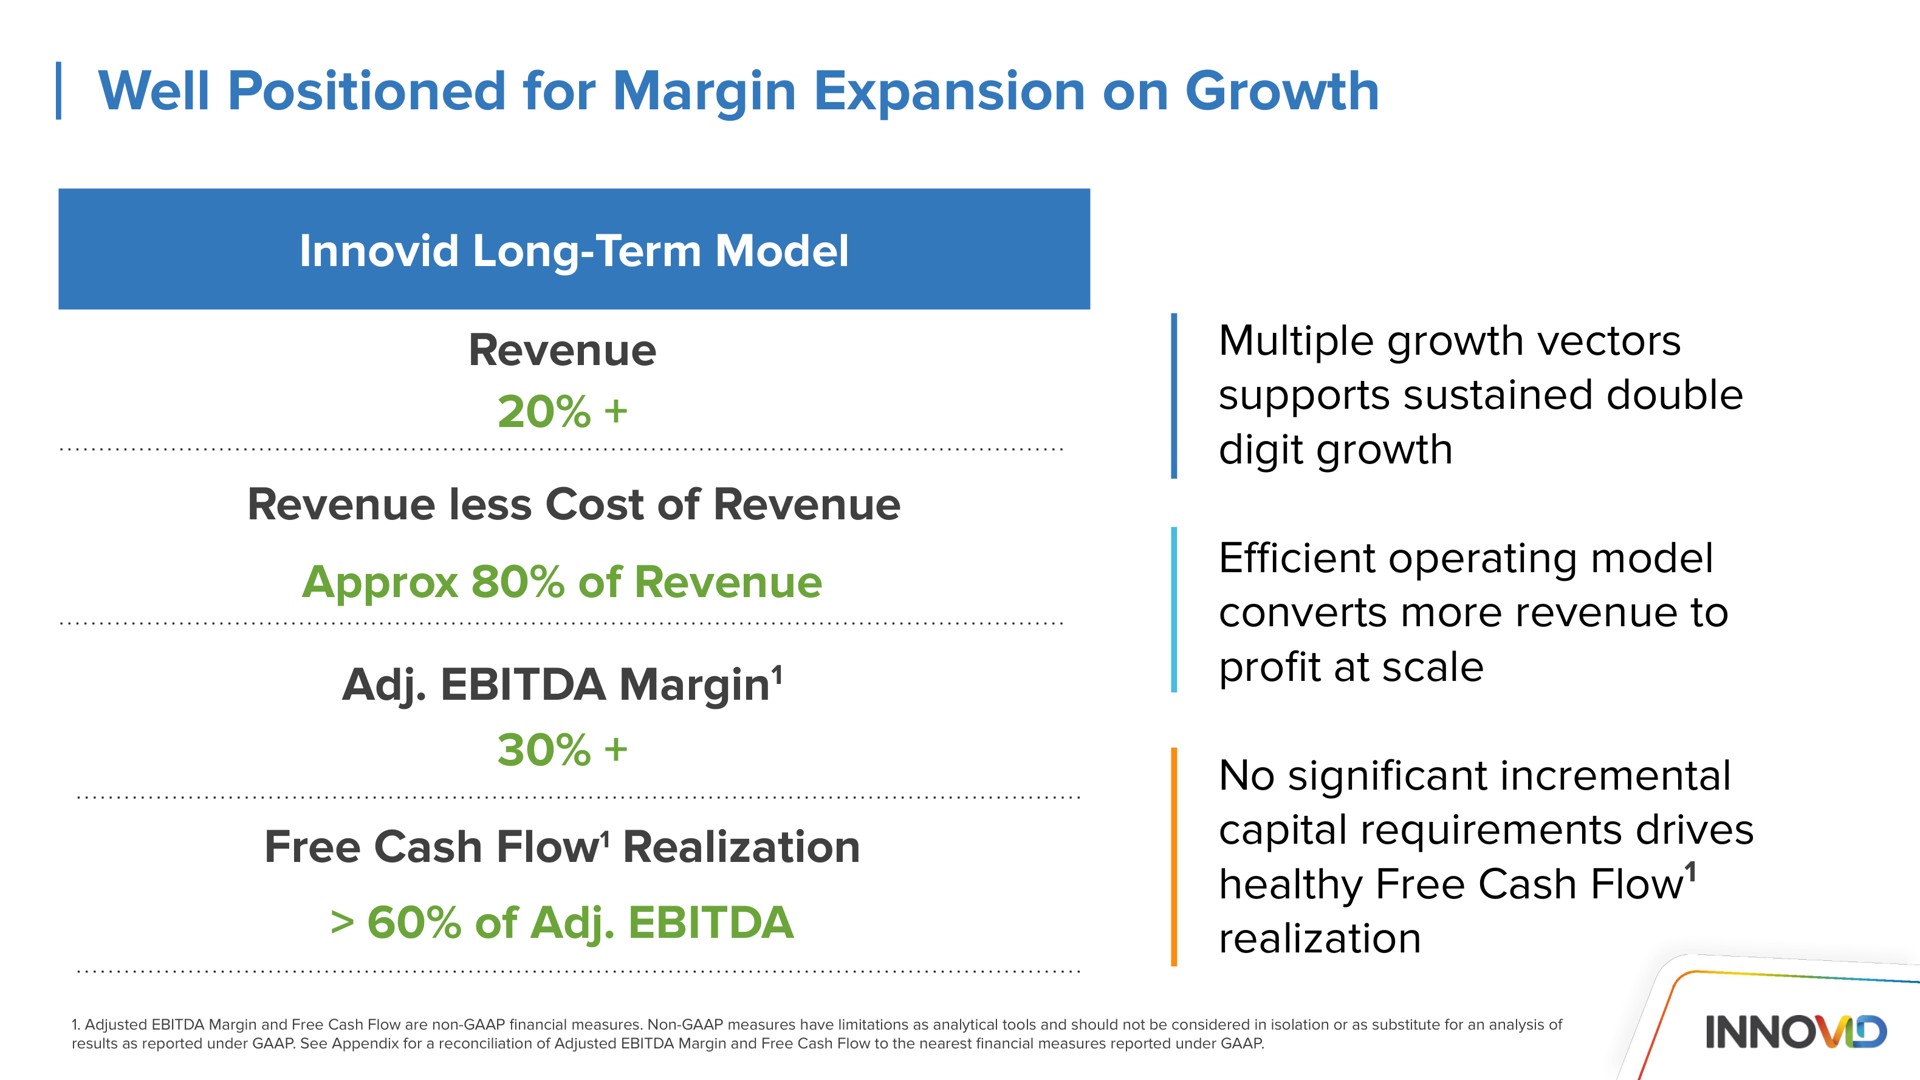 well positioned for margin expansion on growth so scale no significant incremental healthy free cash flow | Innovid